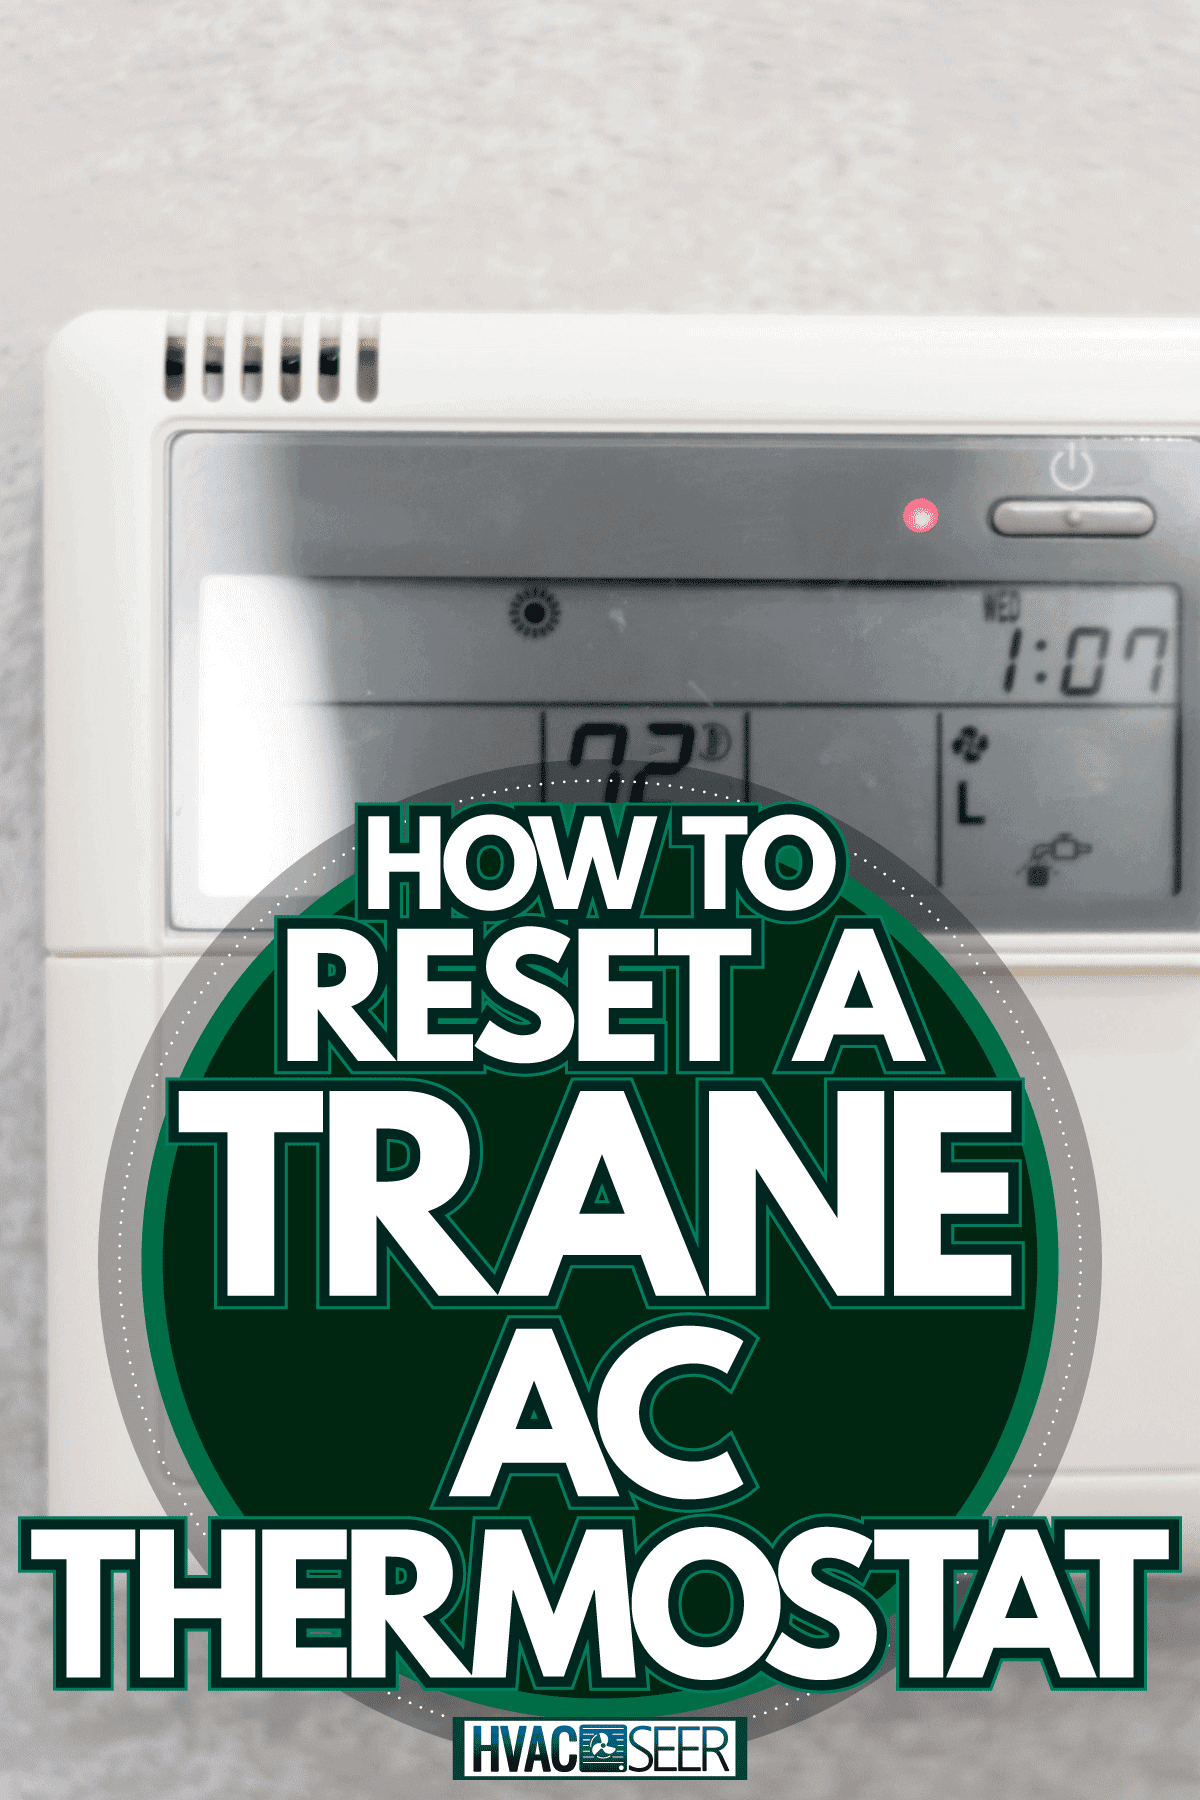 A trane thermostat set to 72 degrees mounted on the wall, How To Reset A Trane AC Thermostat